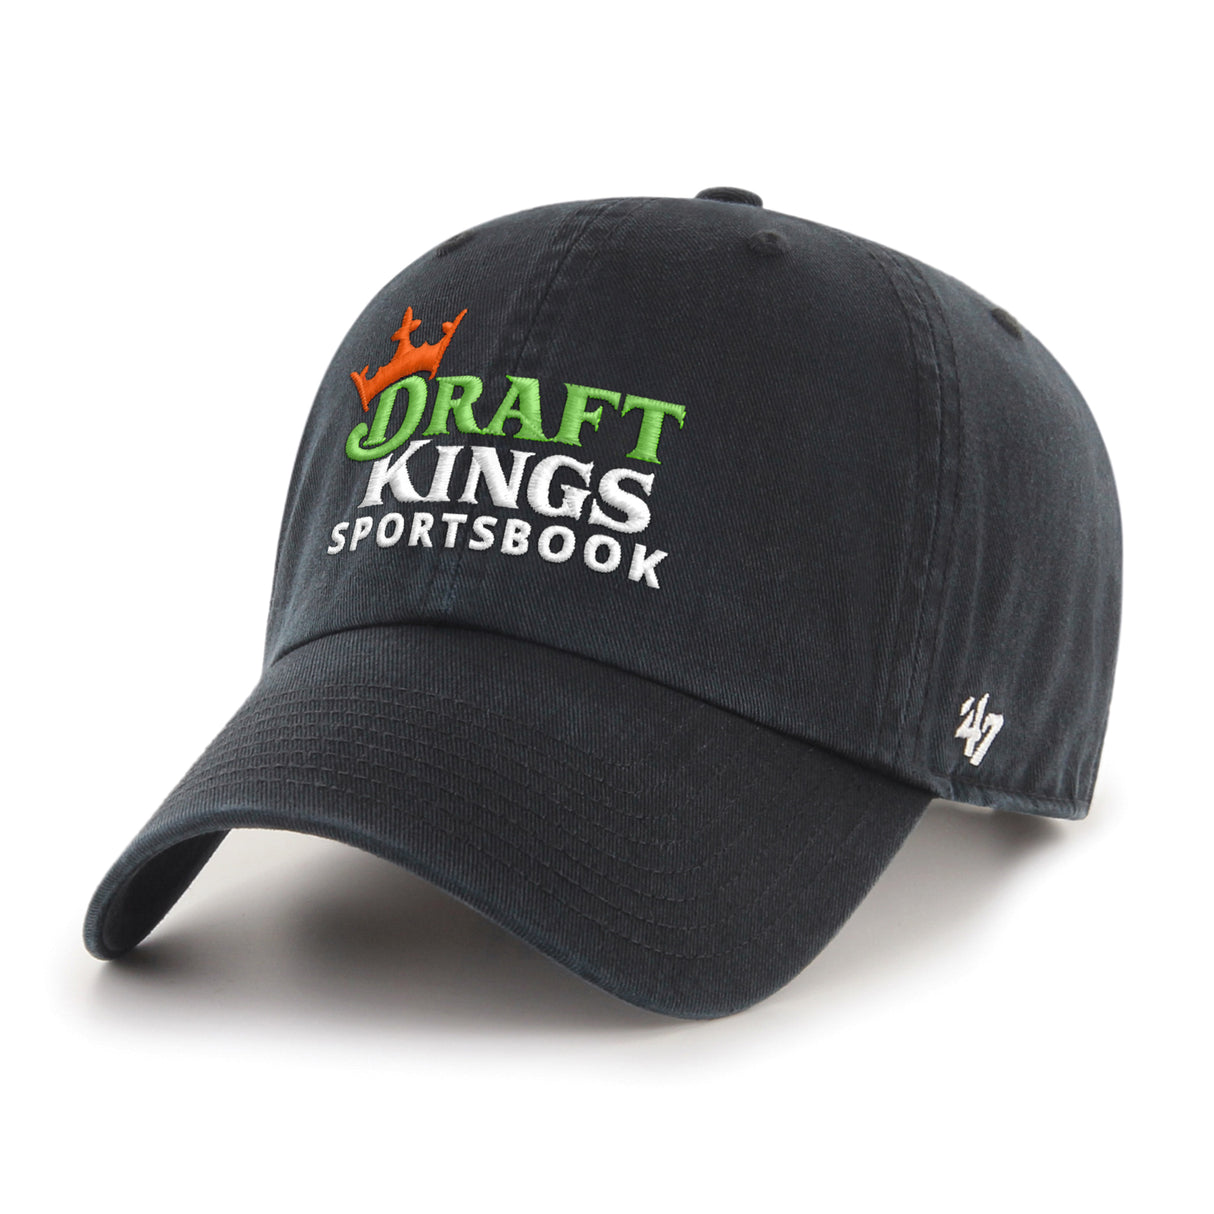 DraftKings x '47 Sportsbook Clean Up Hat